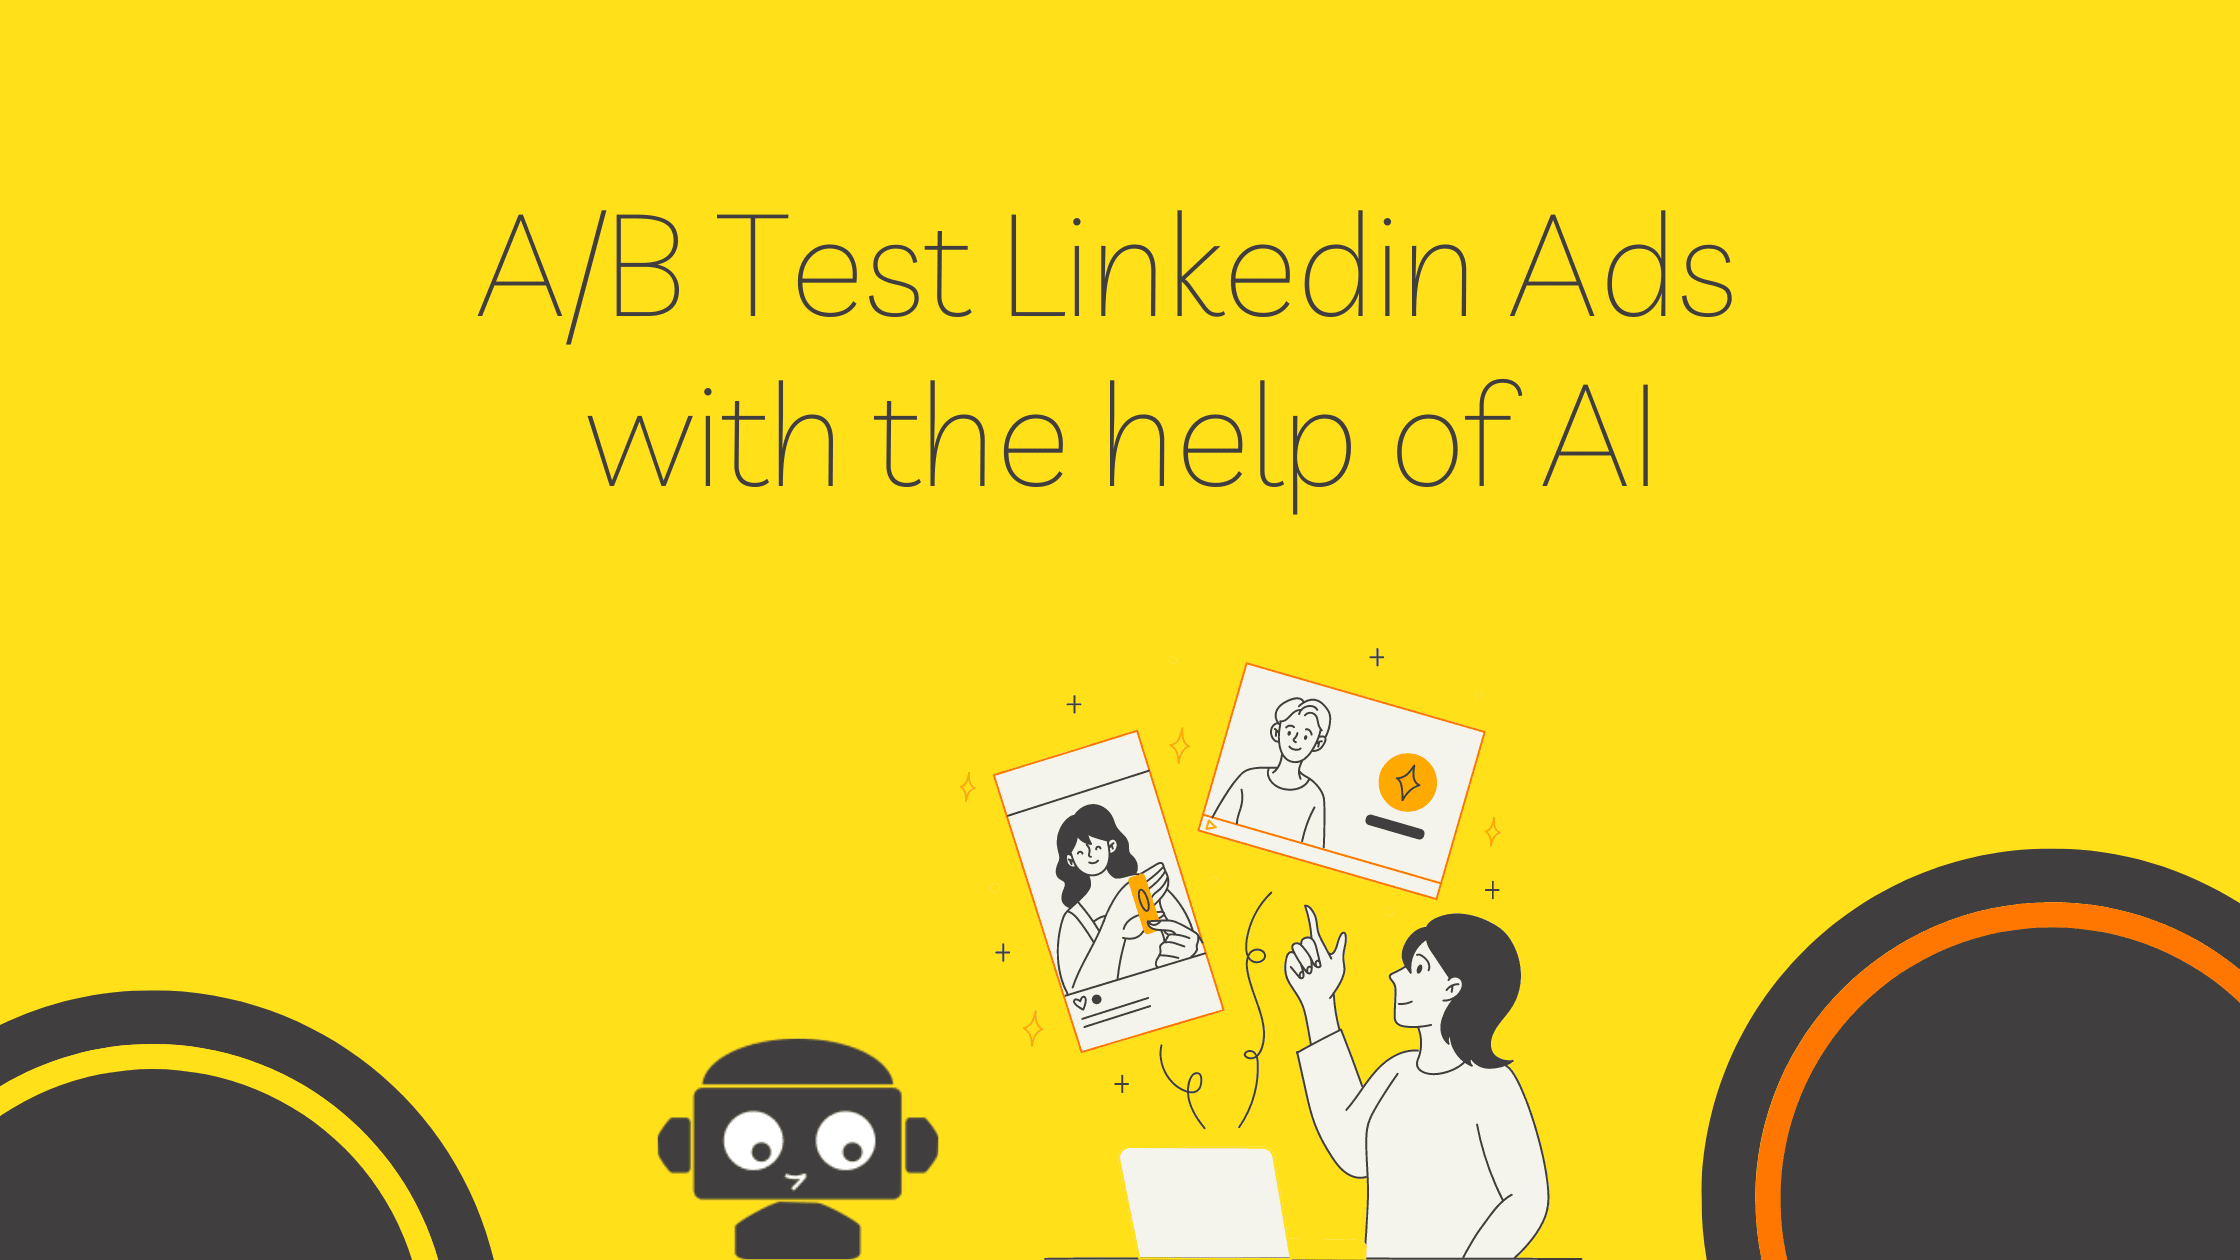 AB Test Linkedin Ads with the power of AI